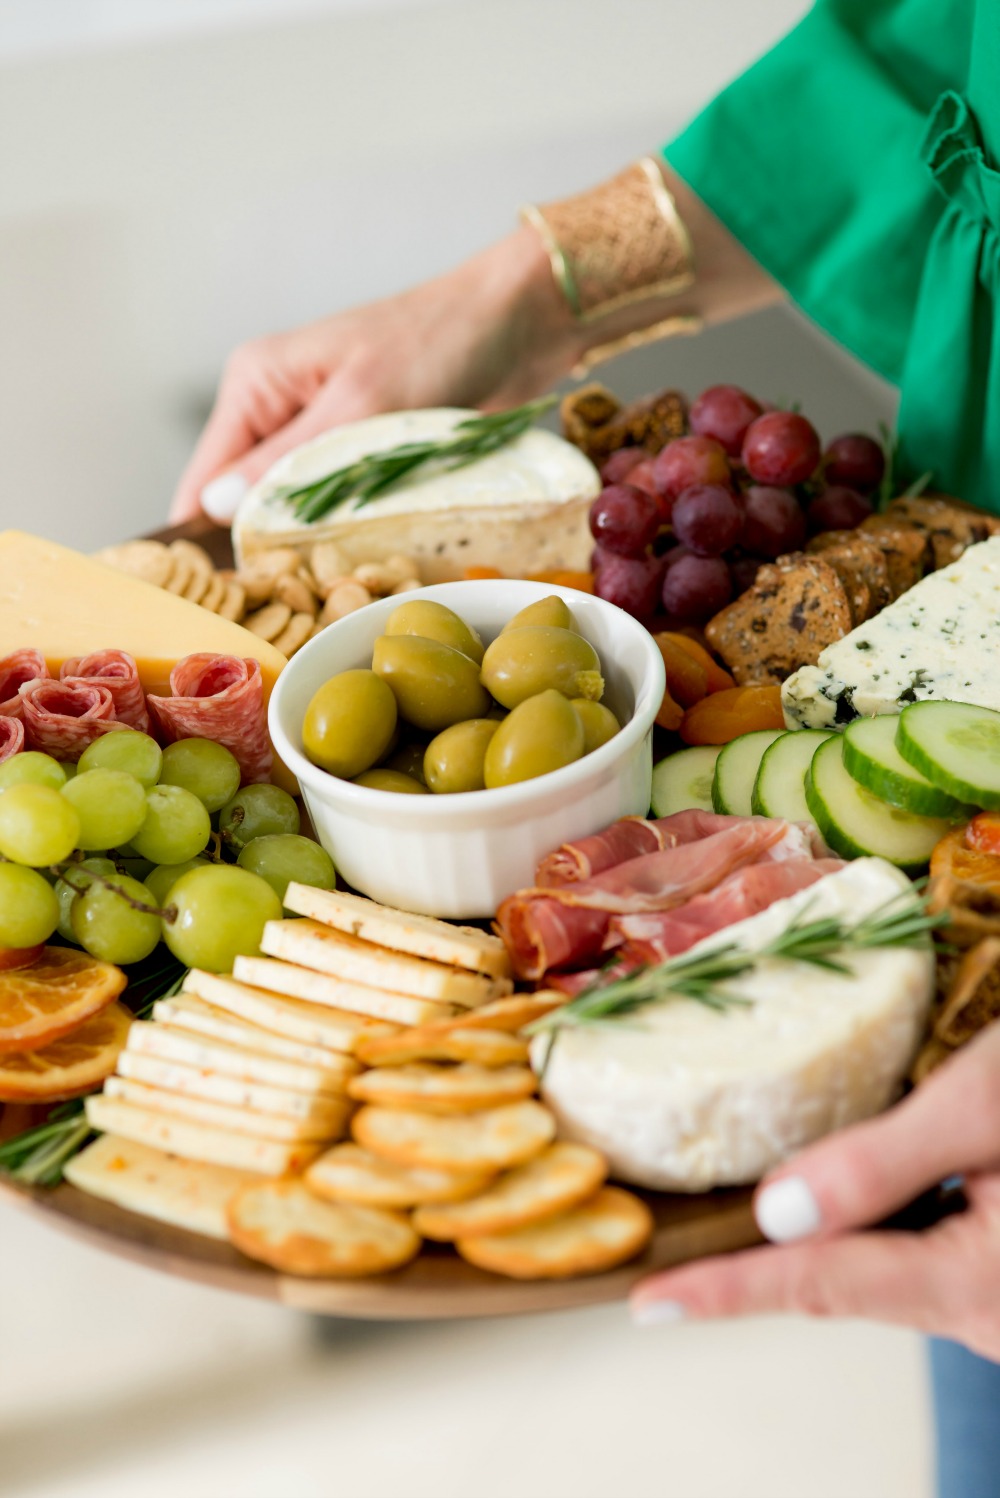 The Best Cheese Board Ideas for your Next Dinner Party featured by popular Florida life and style blogger The Modern Savvy